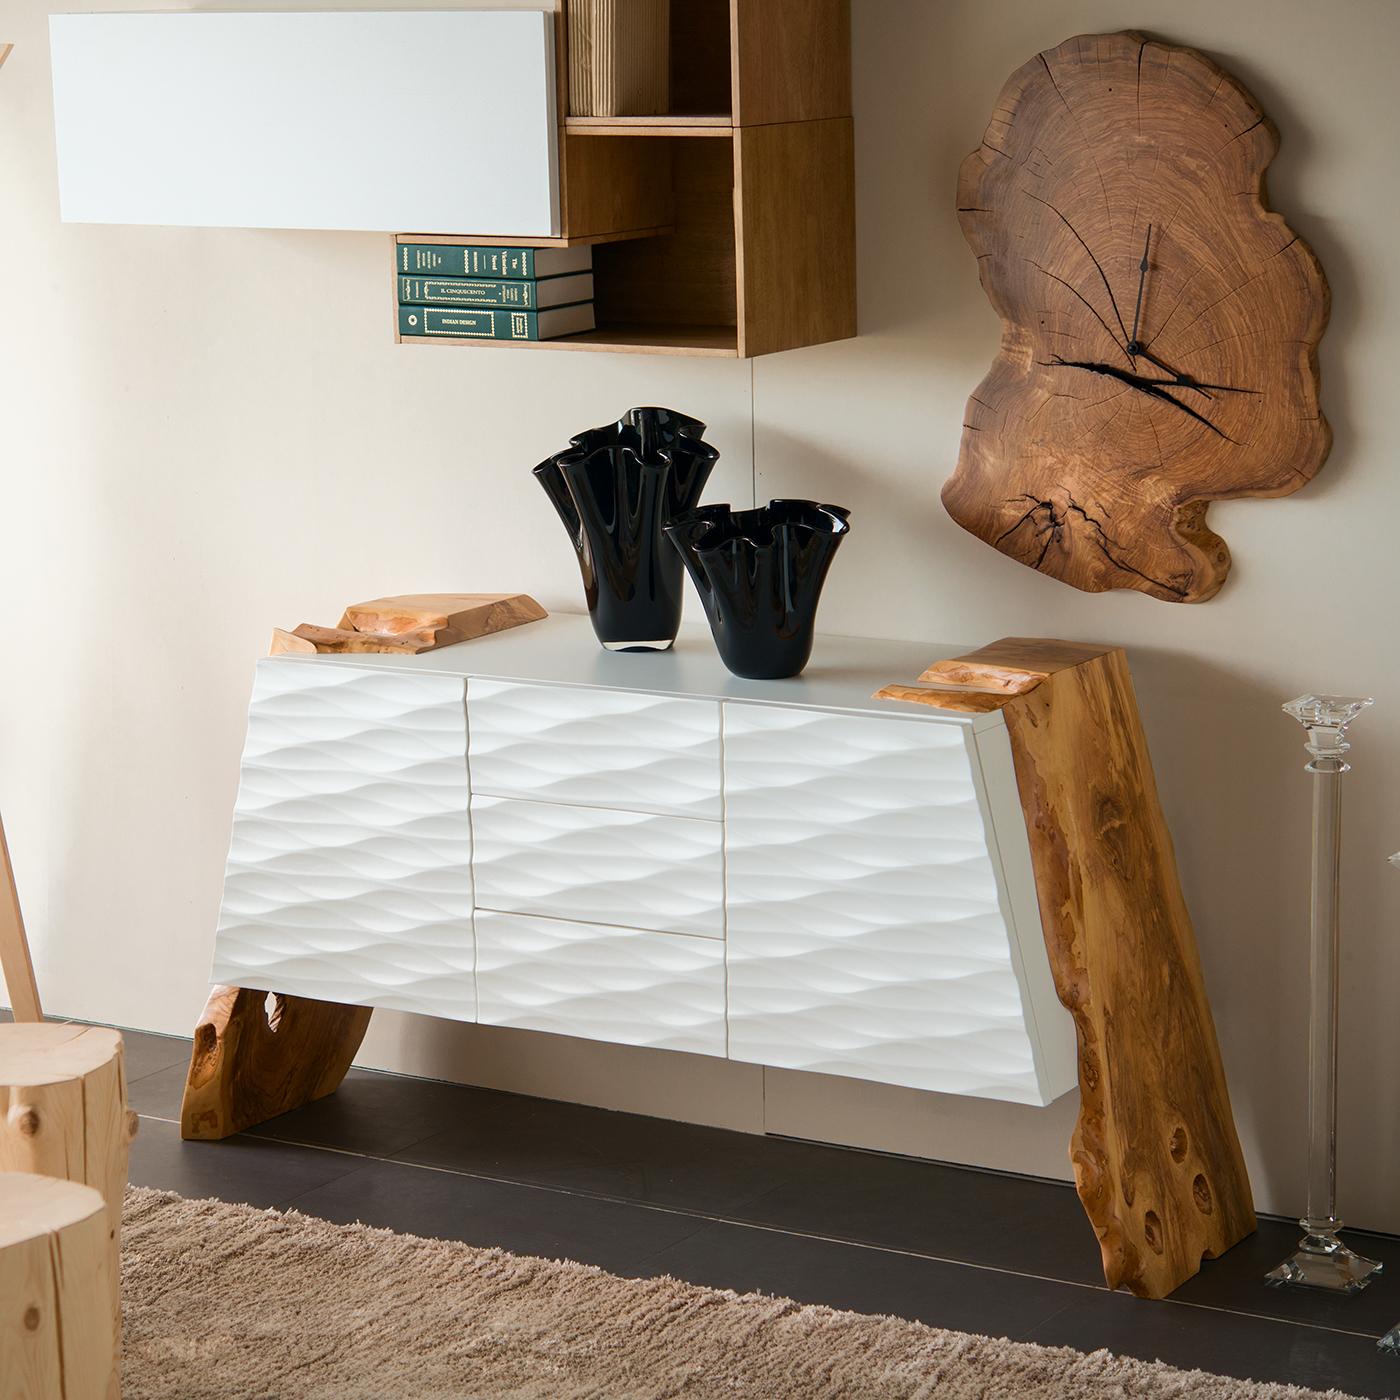 There’s an endearing elegance in the fluidity and simplicity of this sideboard's design. The minimalist geometry of the birch plywood frame with a textured, white-lacquered finish and the angled natural olive wood legs create an appealing, modern